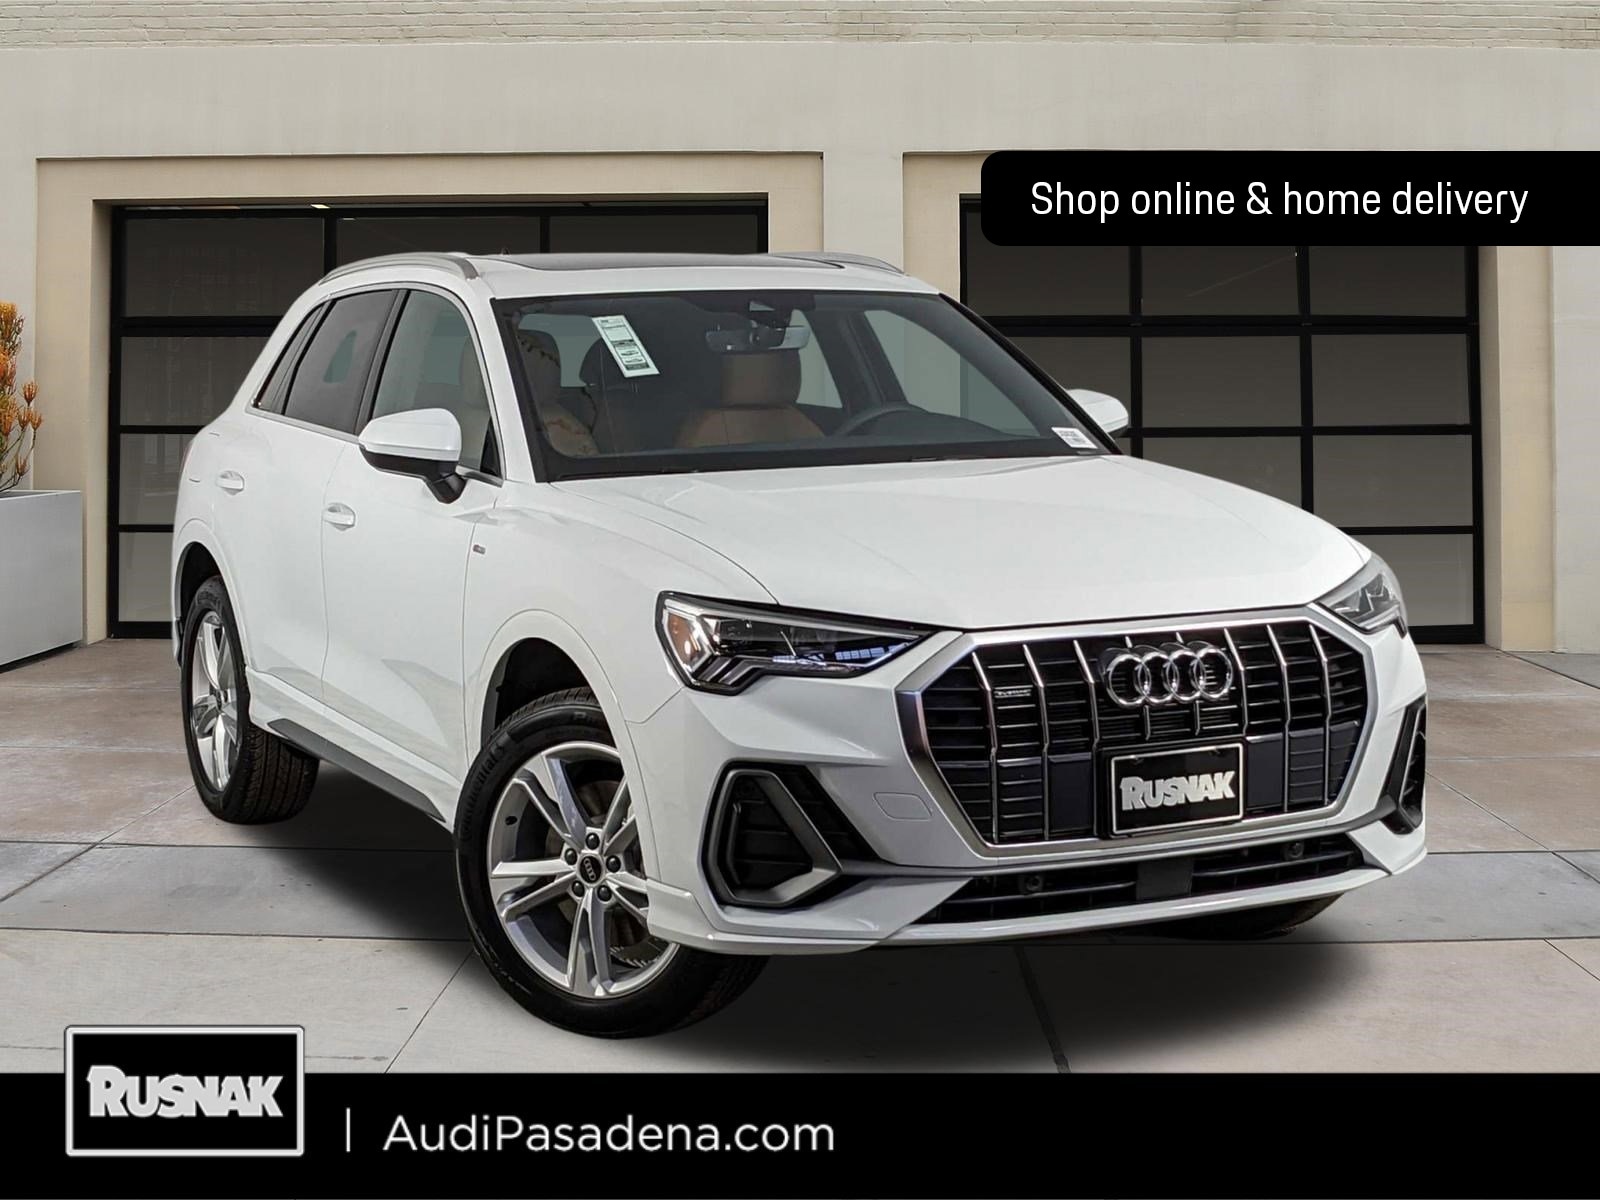 New Audi Q3 for Sale near Los Angeles